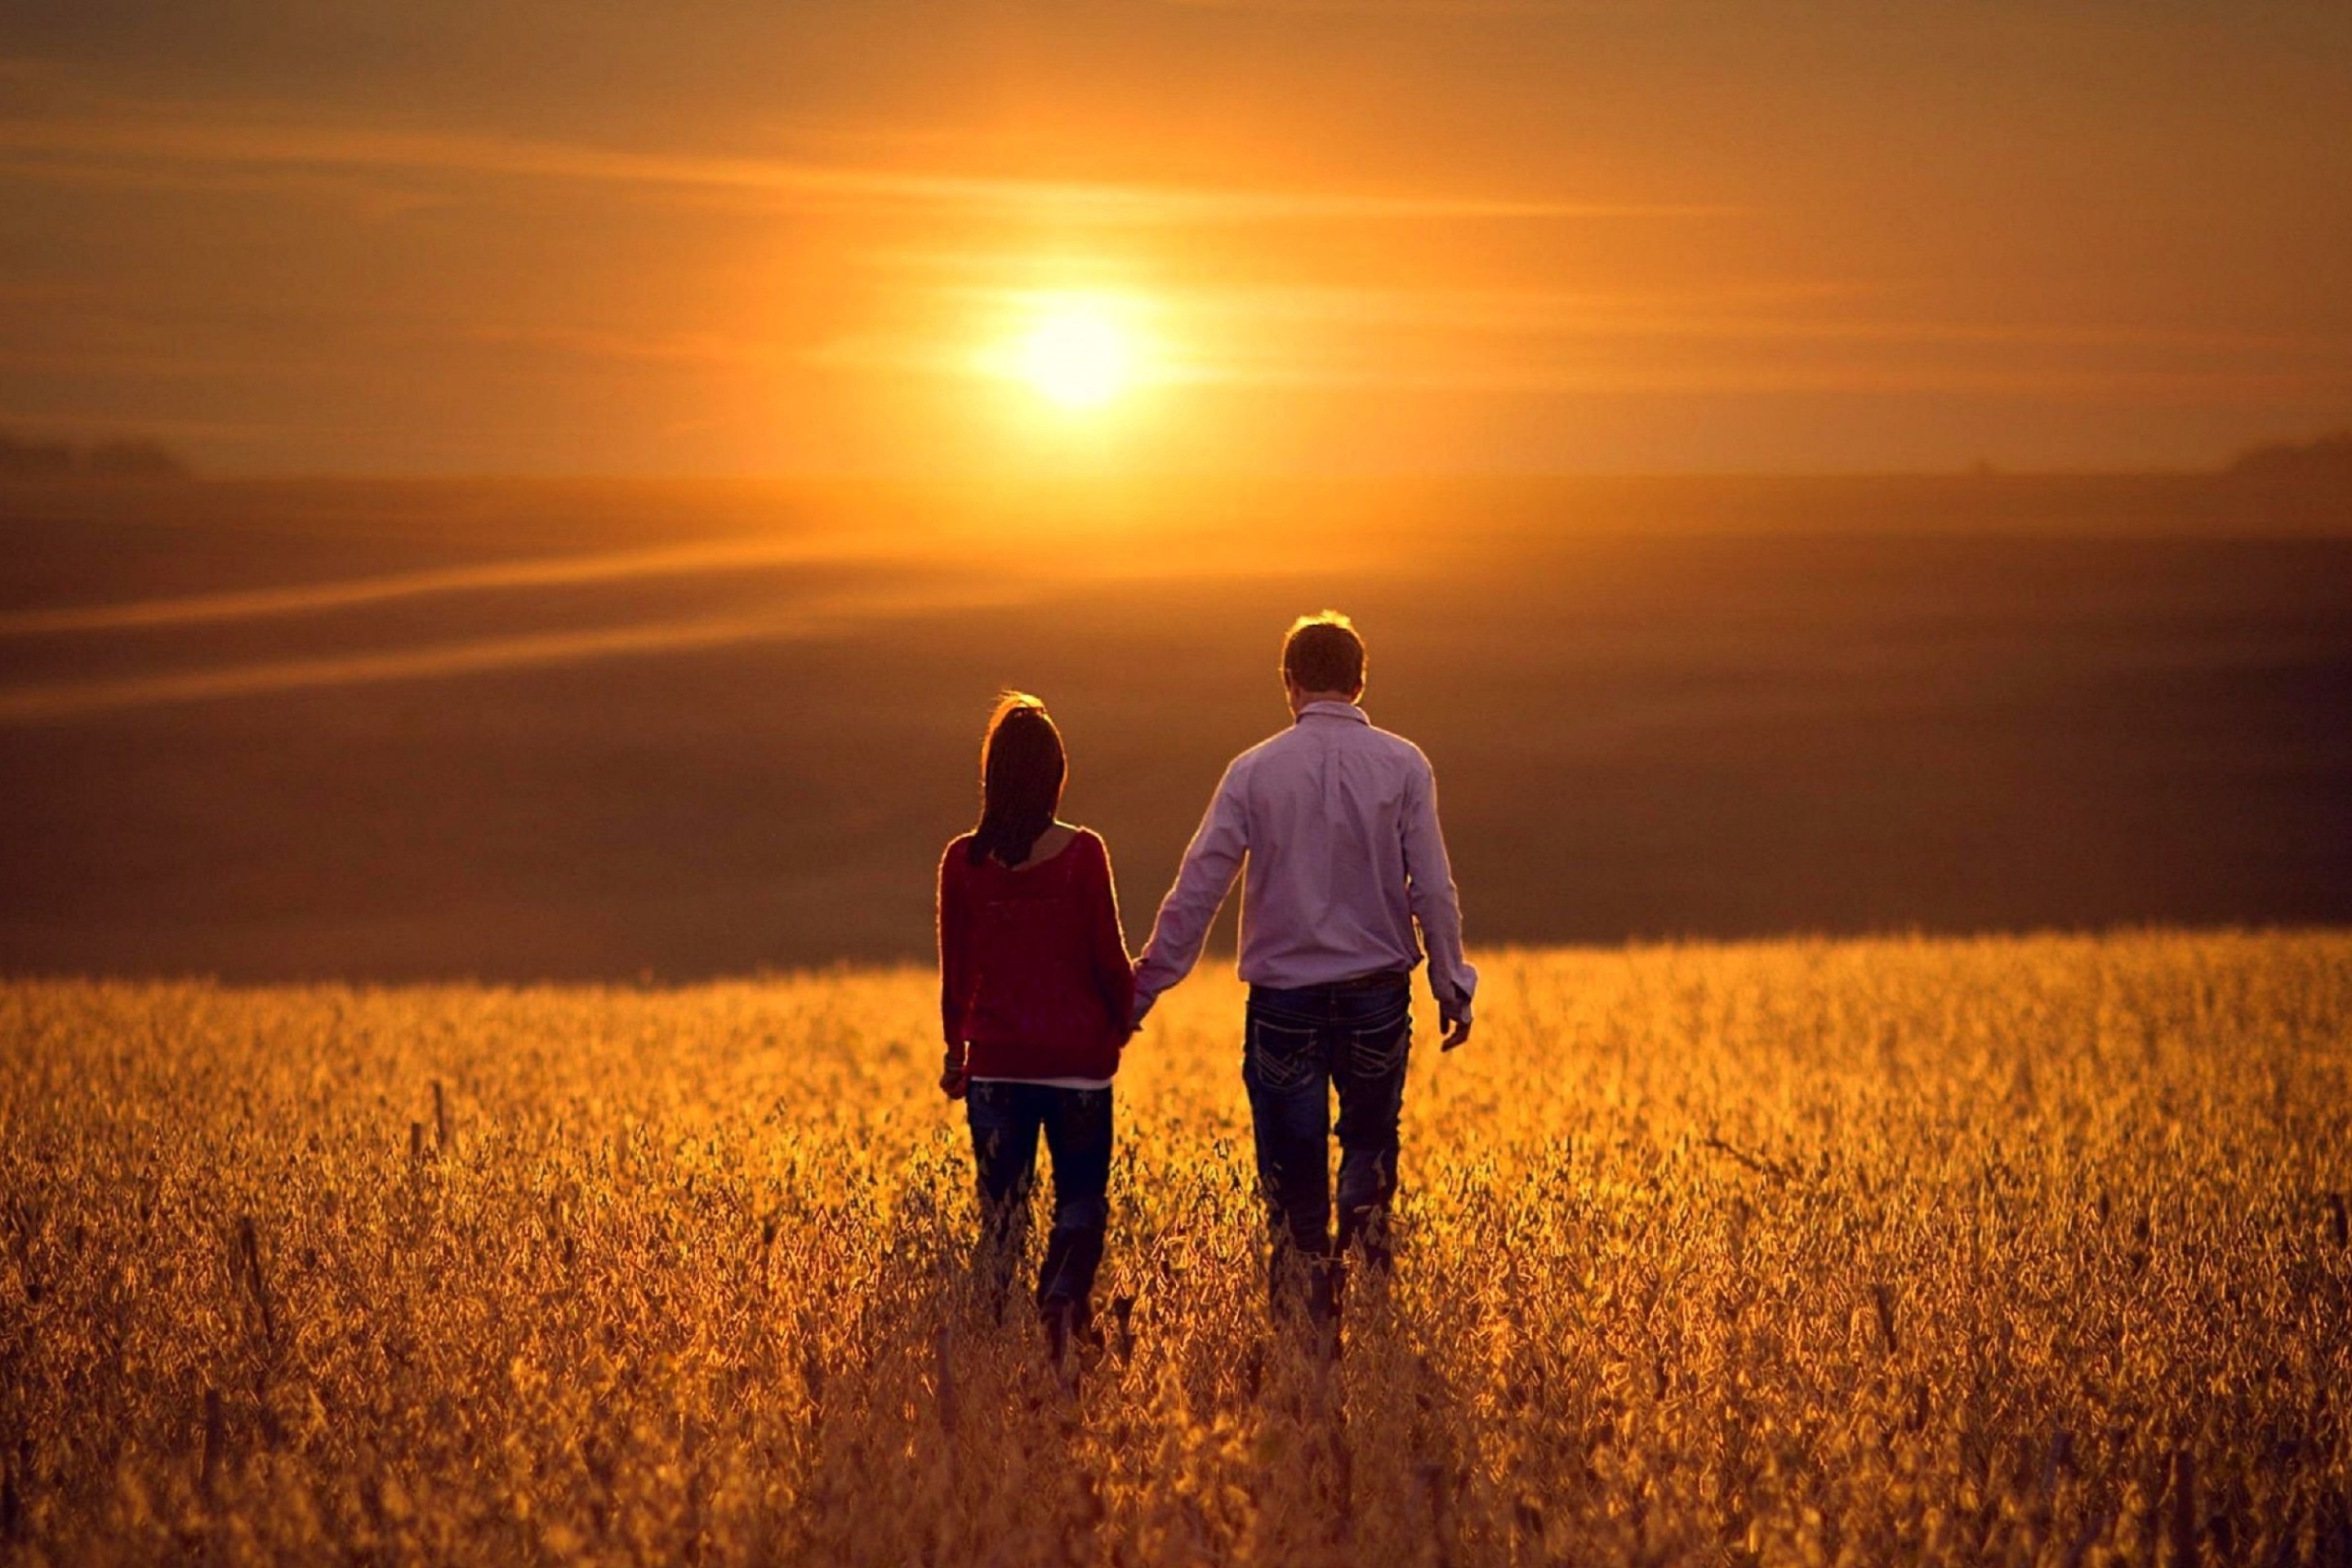 Couple at sunset wallpaper 2880x1920